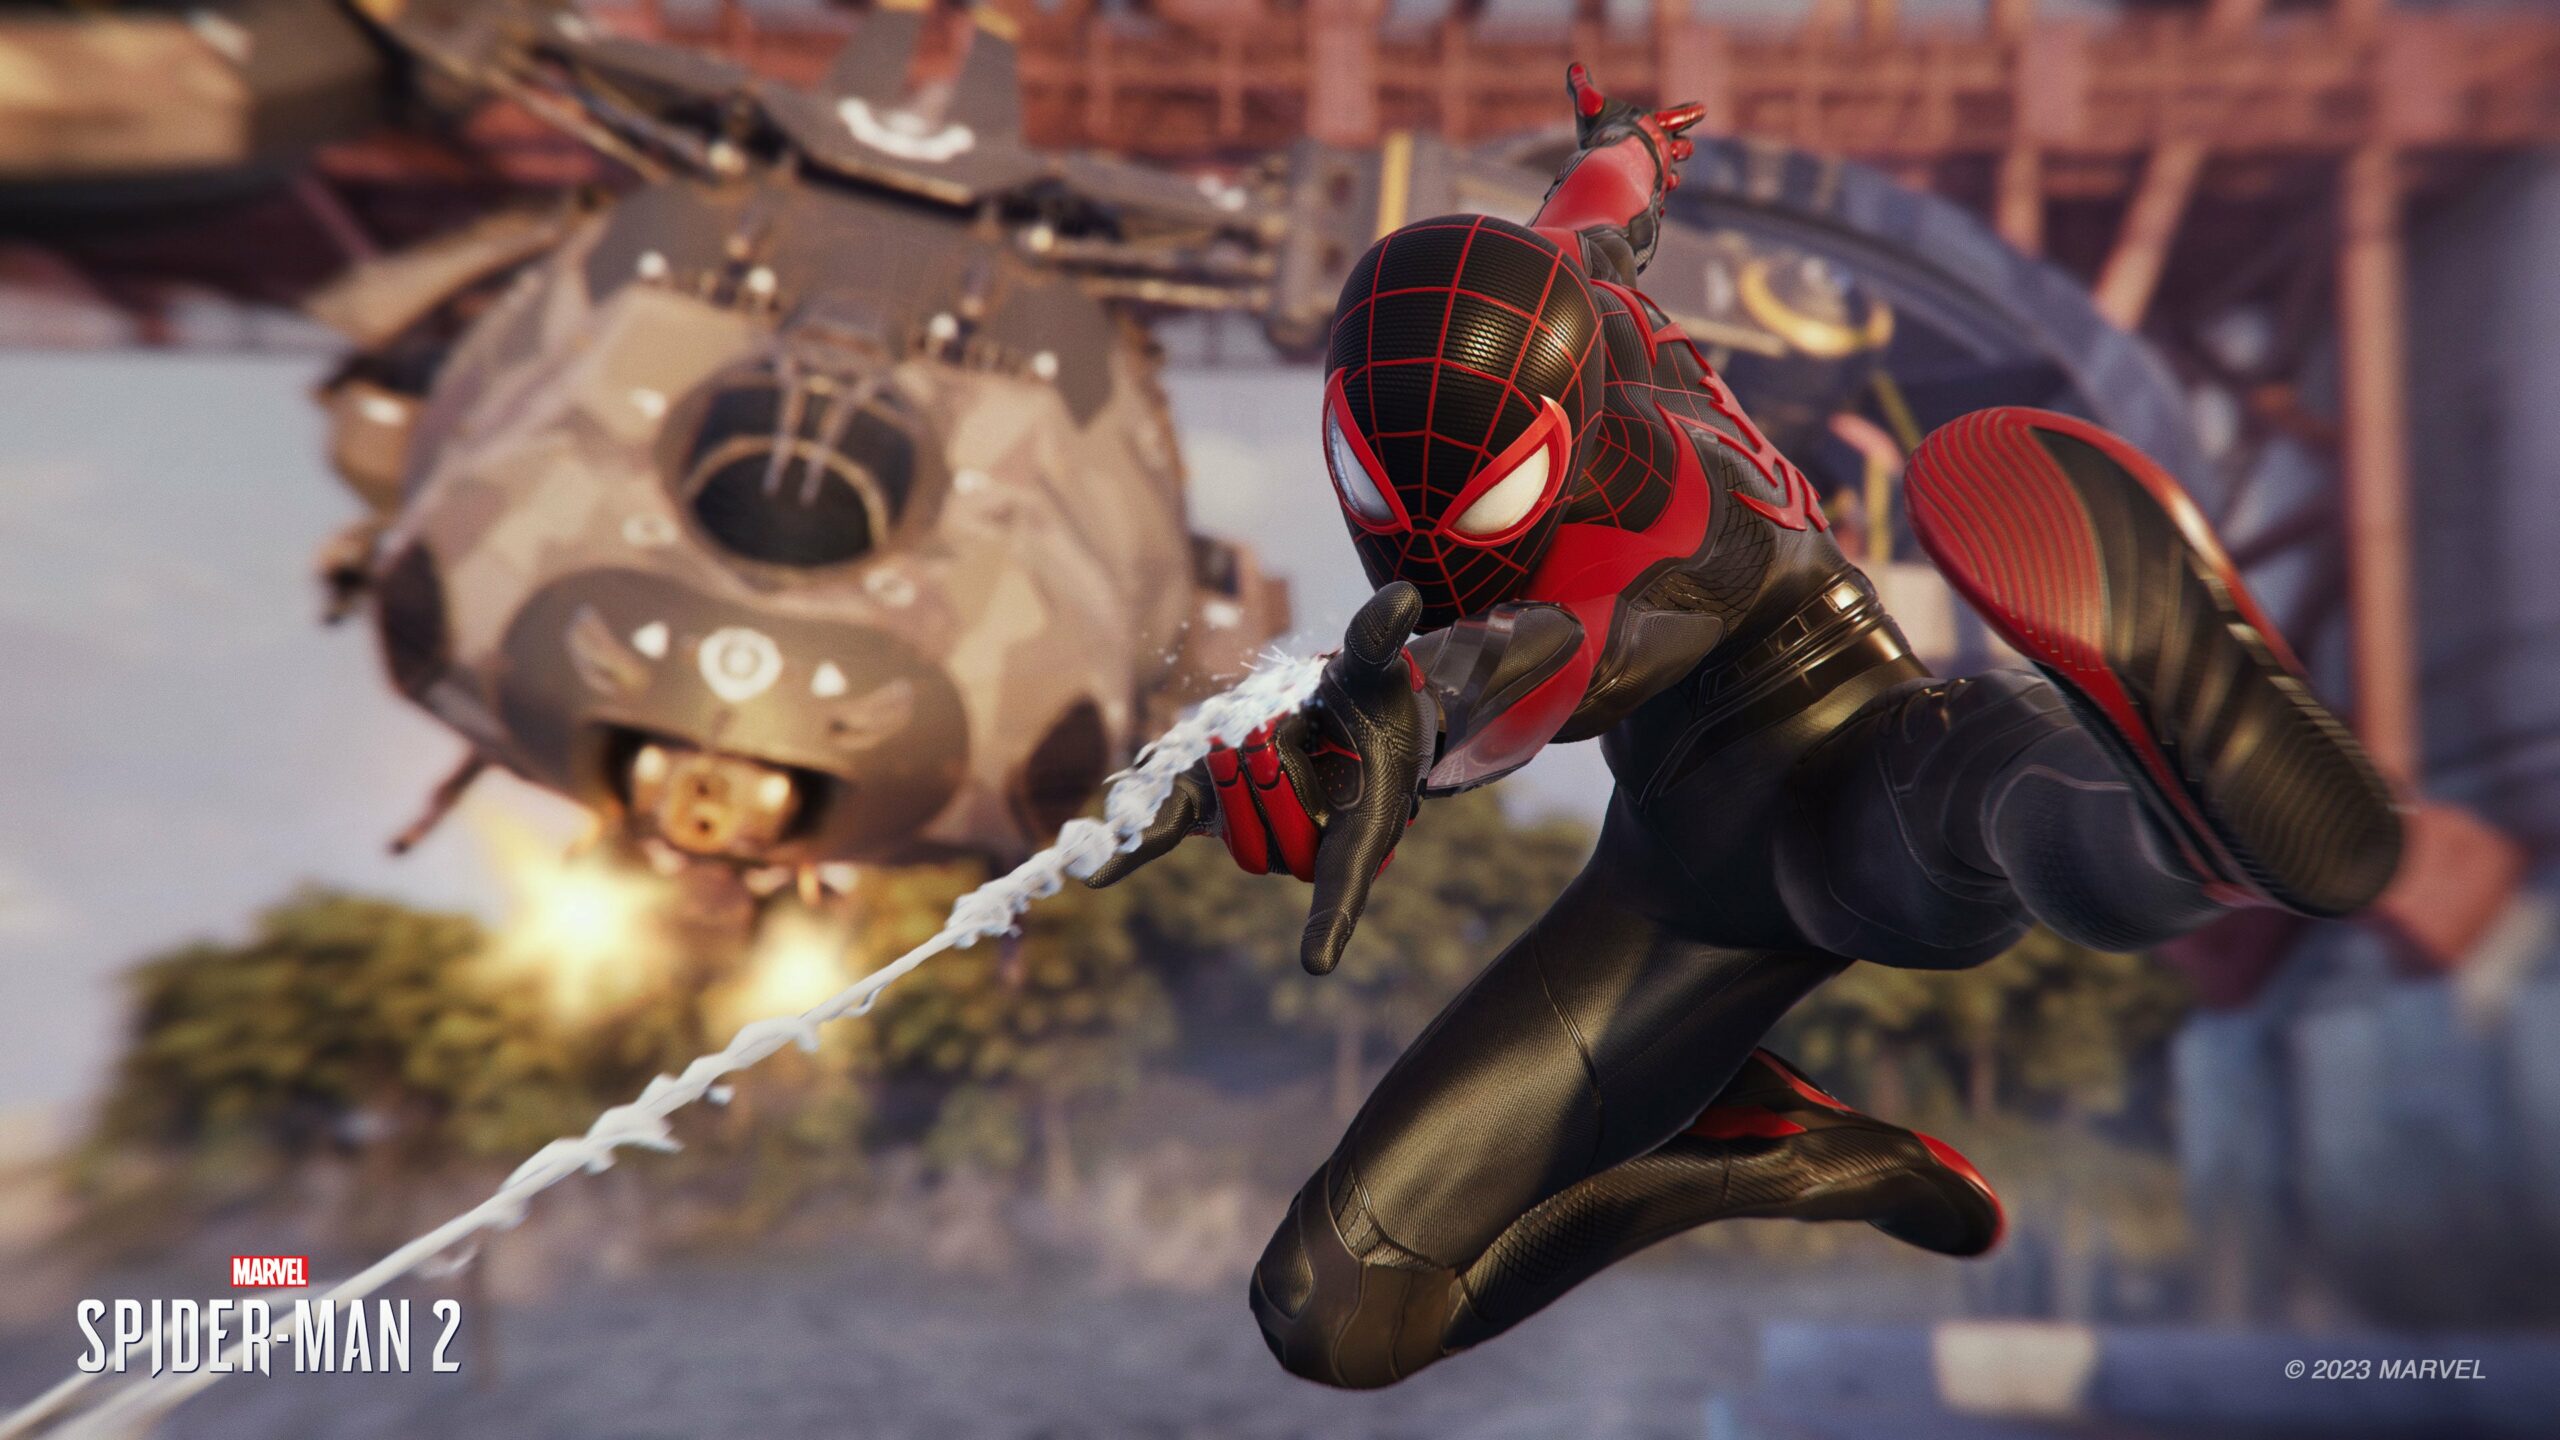 Insomniac Games has announced that Spider-Man 2 will have its own panel at Comic-Con on 20 July